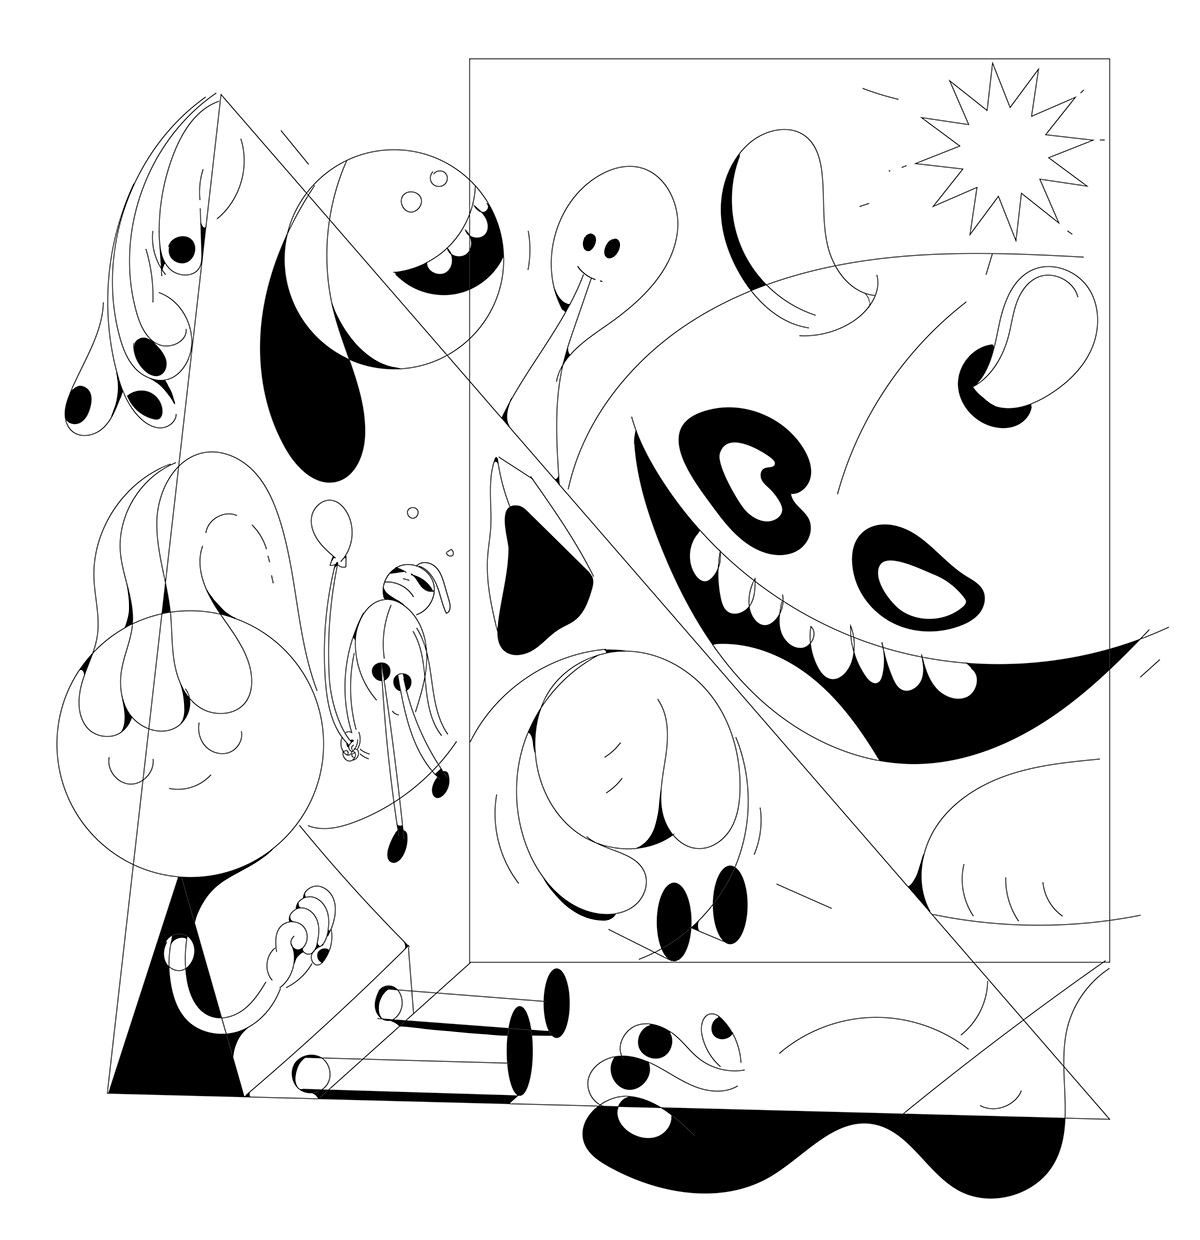 ILLUSTRATION  Drawing  abstract surreal characterdesign design Pet animals vector